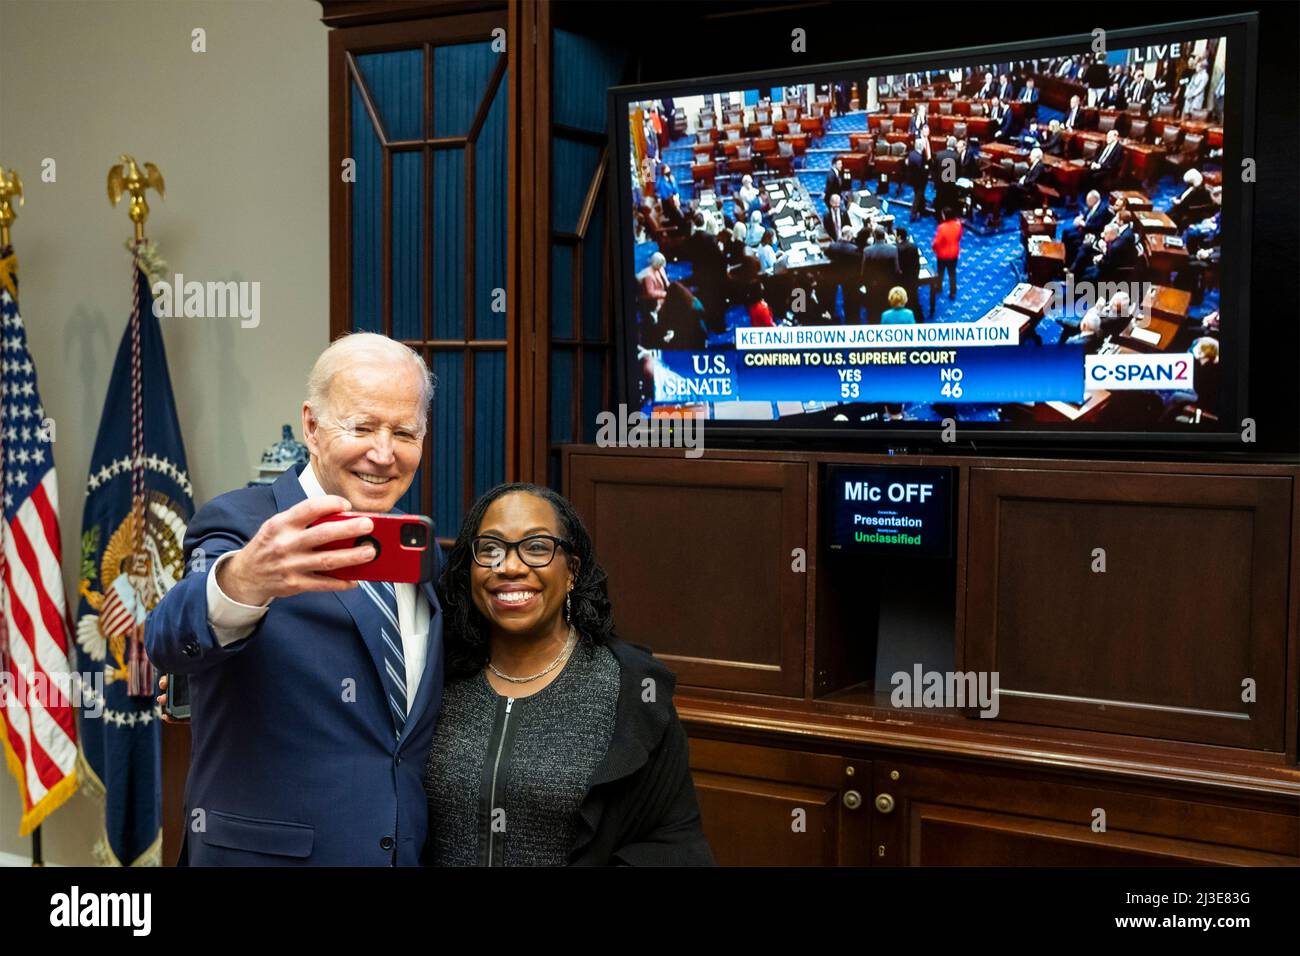 Washington, United States Of America. 07th Apr, 2022. Washington, United States of America. 07 April, 2022. U.S President Joe Biden poses for a selfie with Judge Ketanji Brown Jackson after she was confirmed by the Senate as the first Black woman Supreme Court Associate Justice in the Roosevelt Room of the White House April 7, 2022 in Washington, DC Credit: Adam Schultz/White House Photo/Alamy Live News Stock Photo